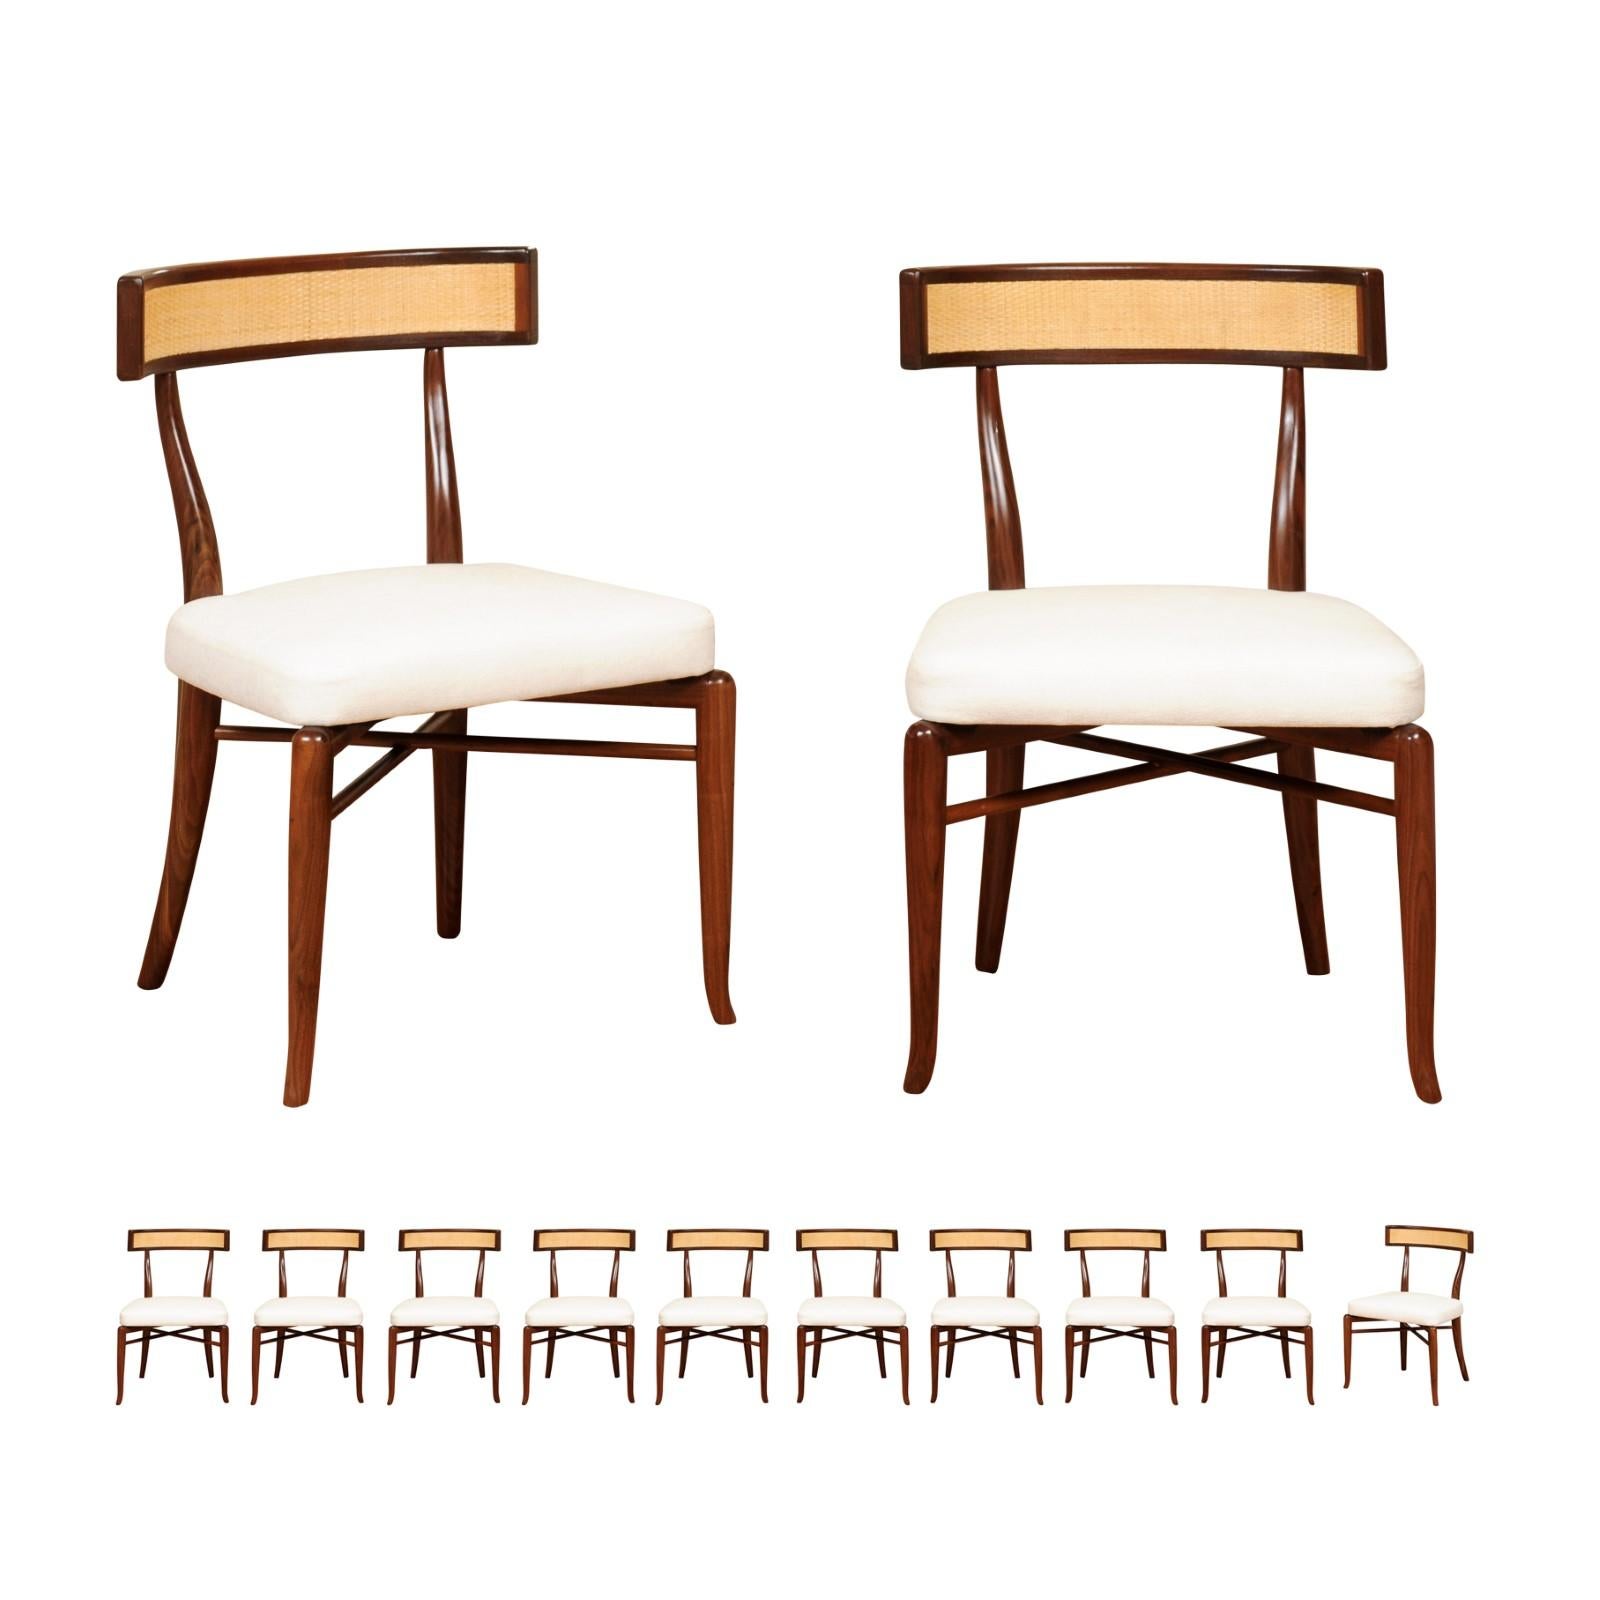 Extraordinary Set of 12 Klismos Side Chairs by Robsjohn-Gibbings, Cane Back For Sale 12